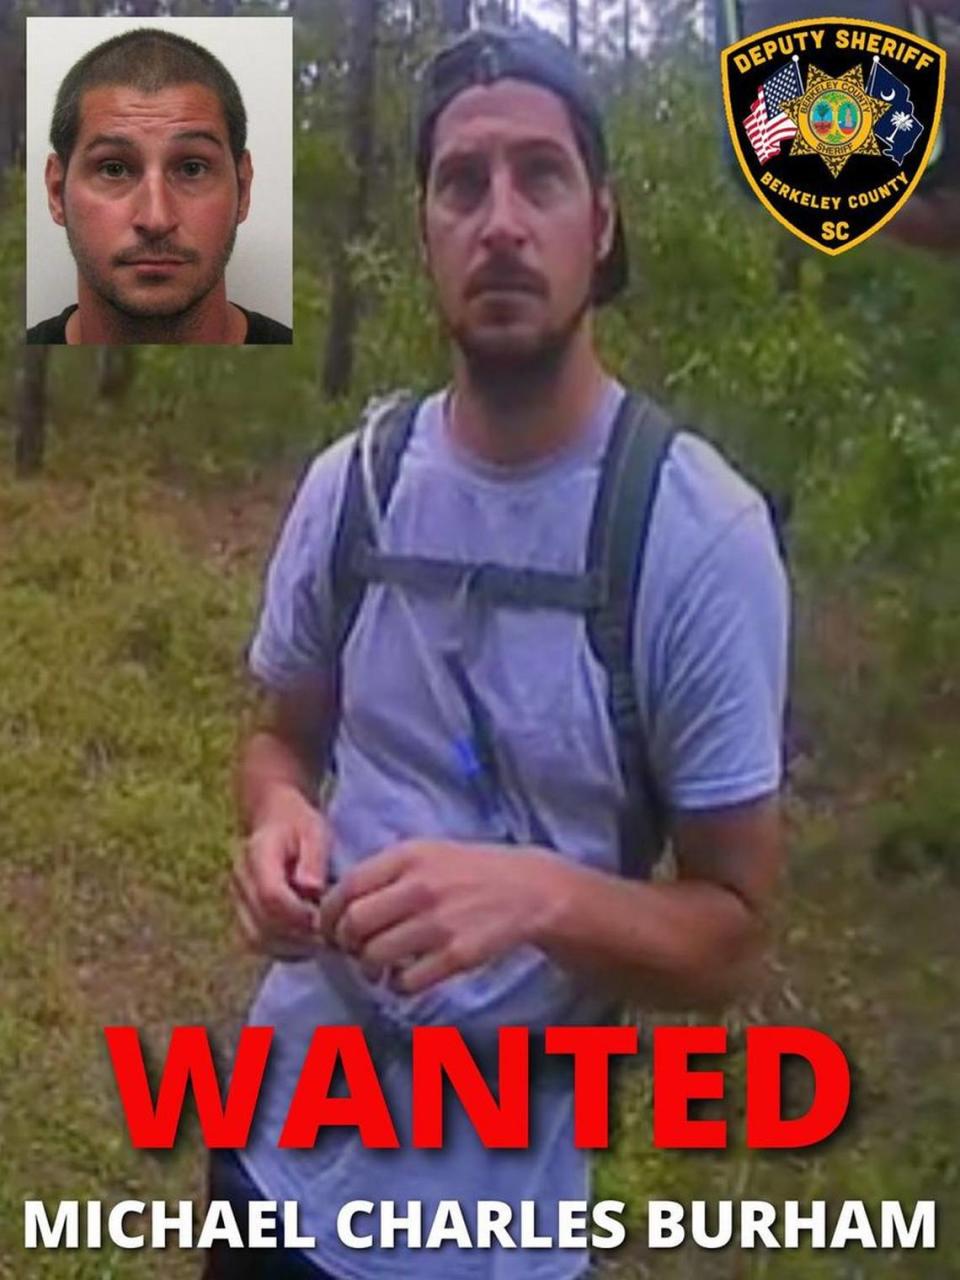 Michael Burham is wanted by the FBI and multiple law enforcement agencies.